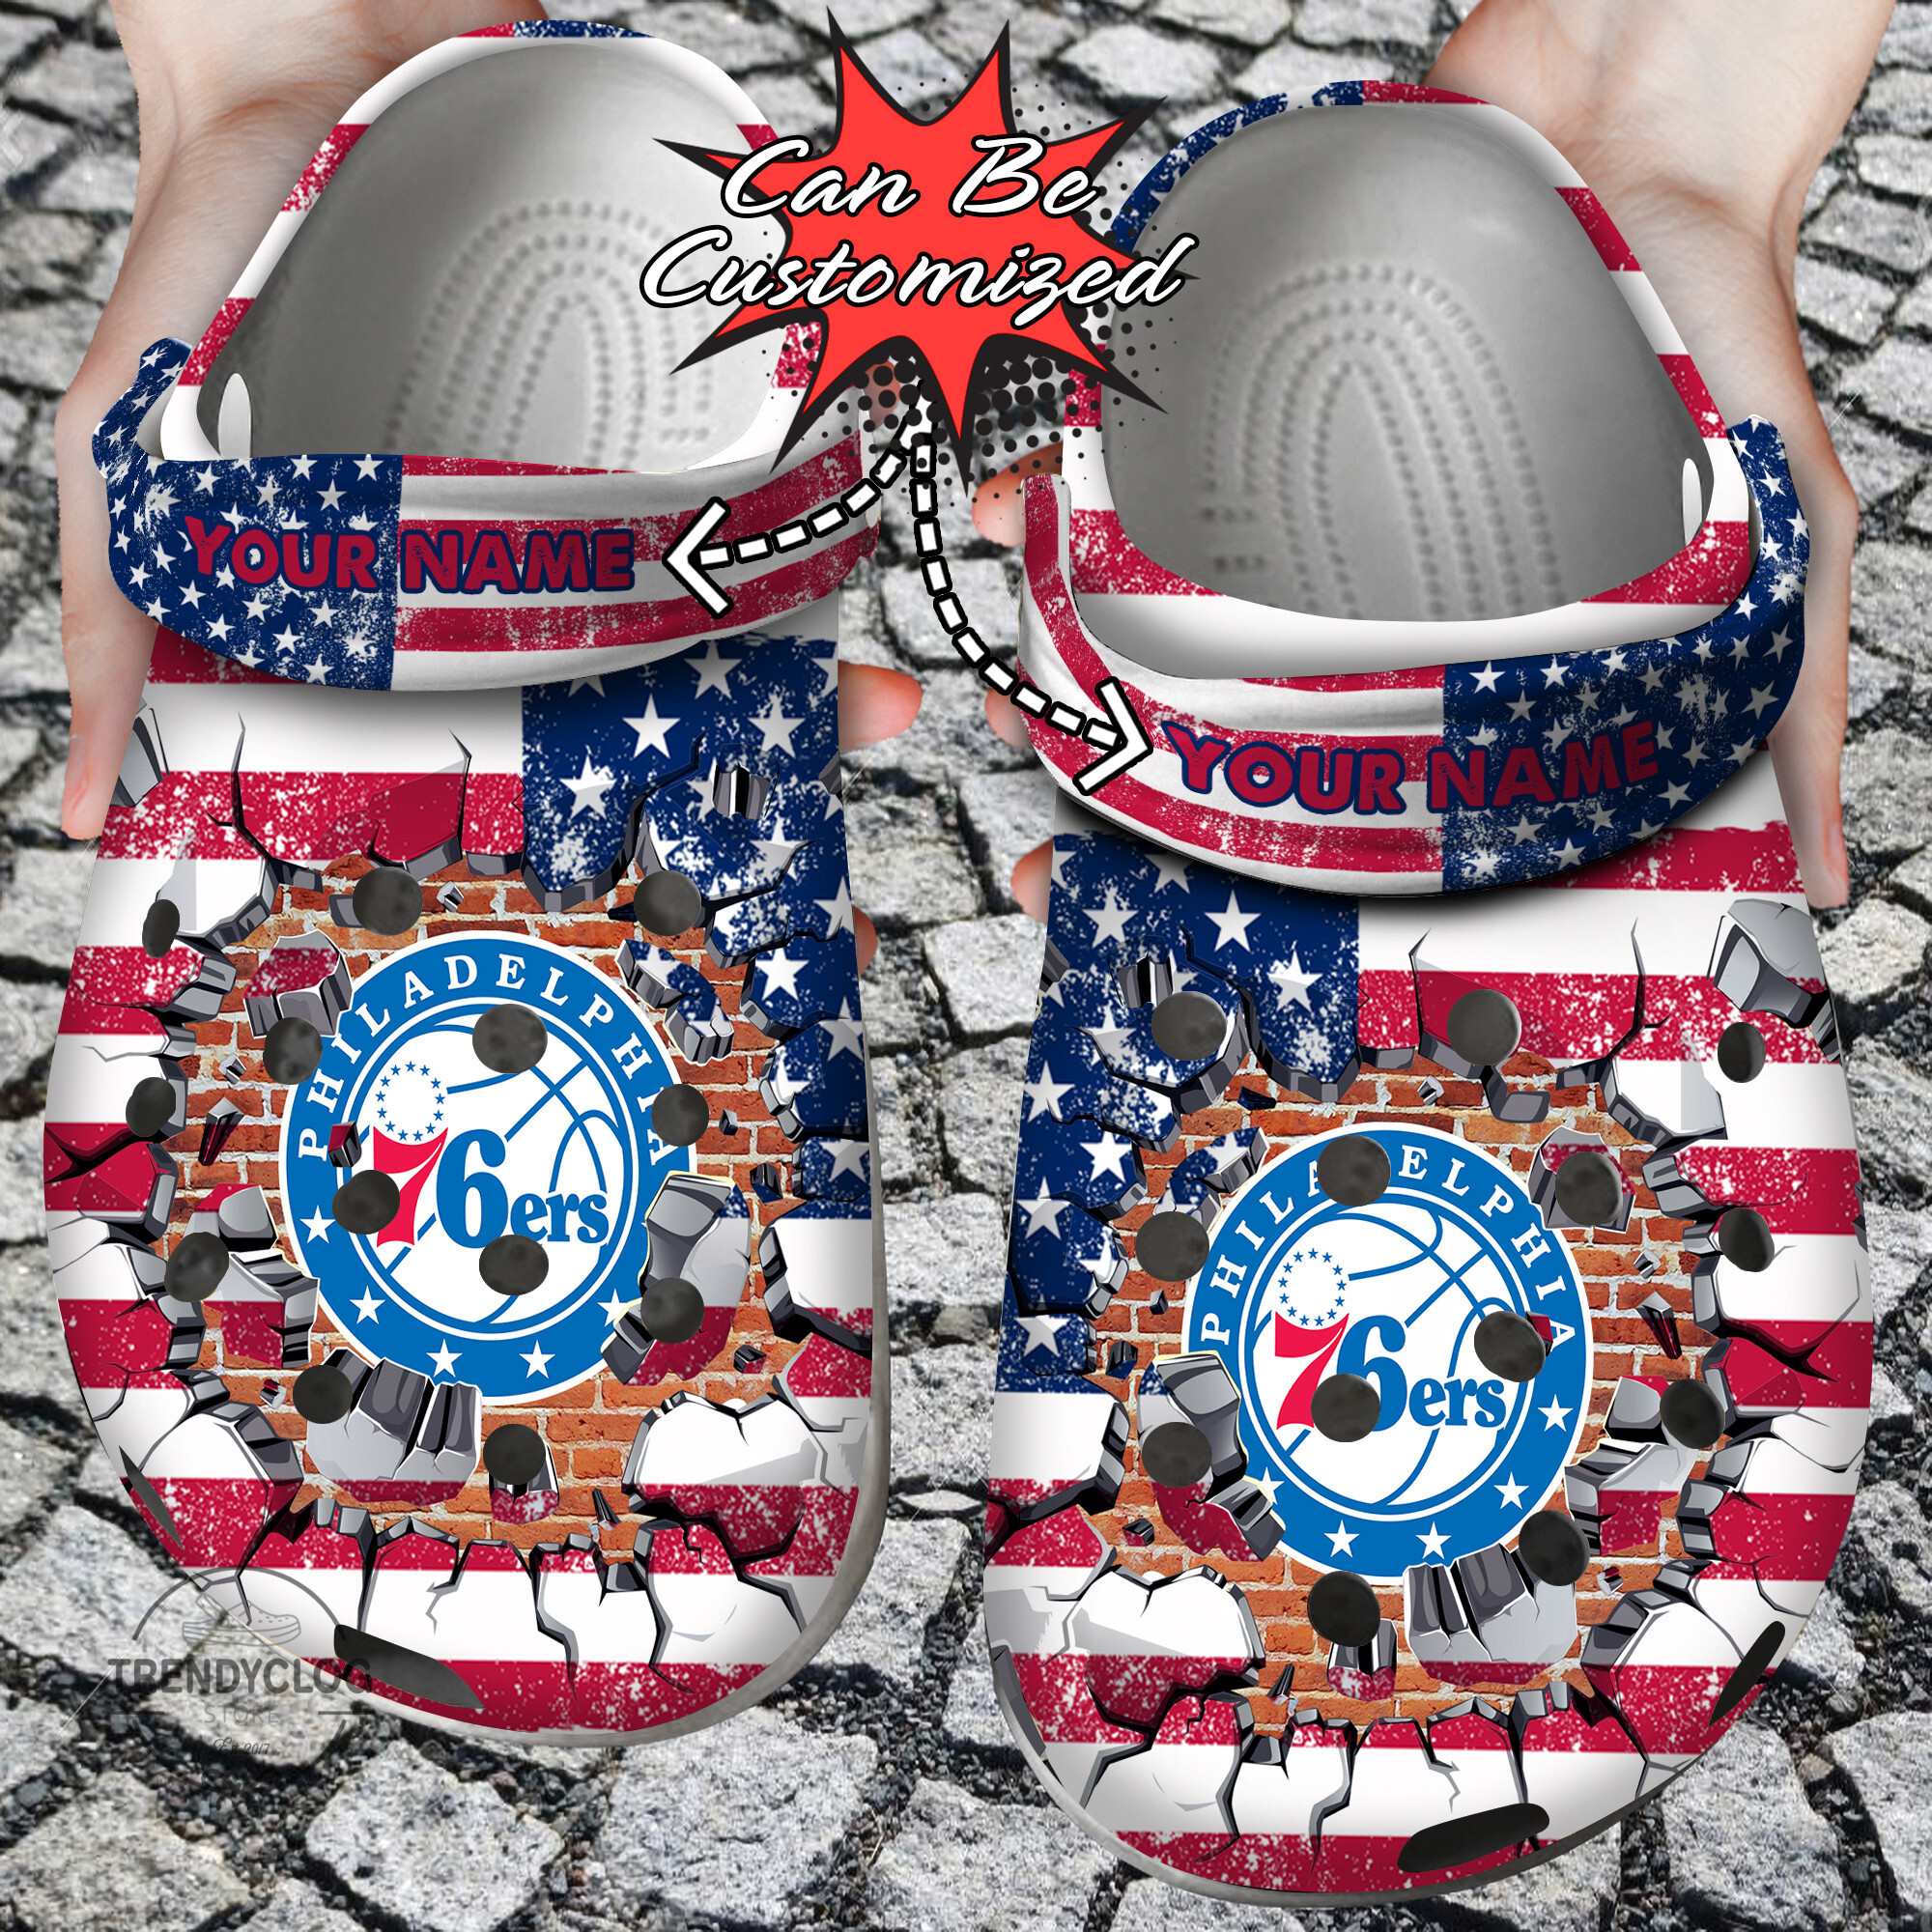 Basketball Crocss – Personalized P.76Ers American Flag Breaking Wall Clog Shoes For Men Women Kids